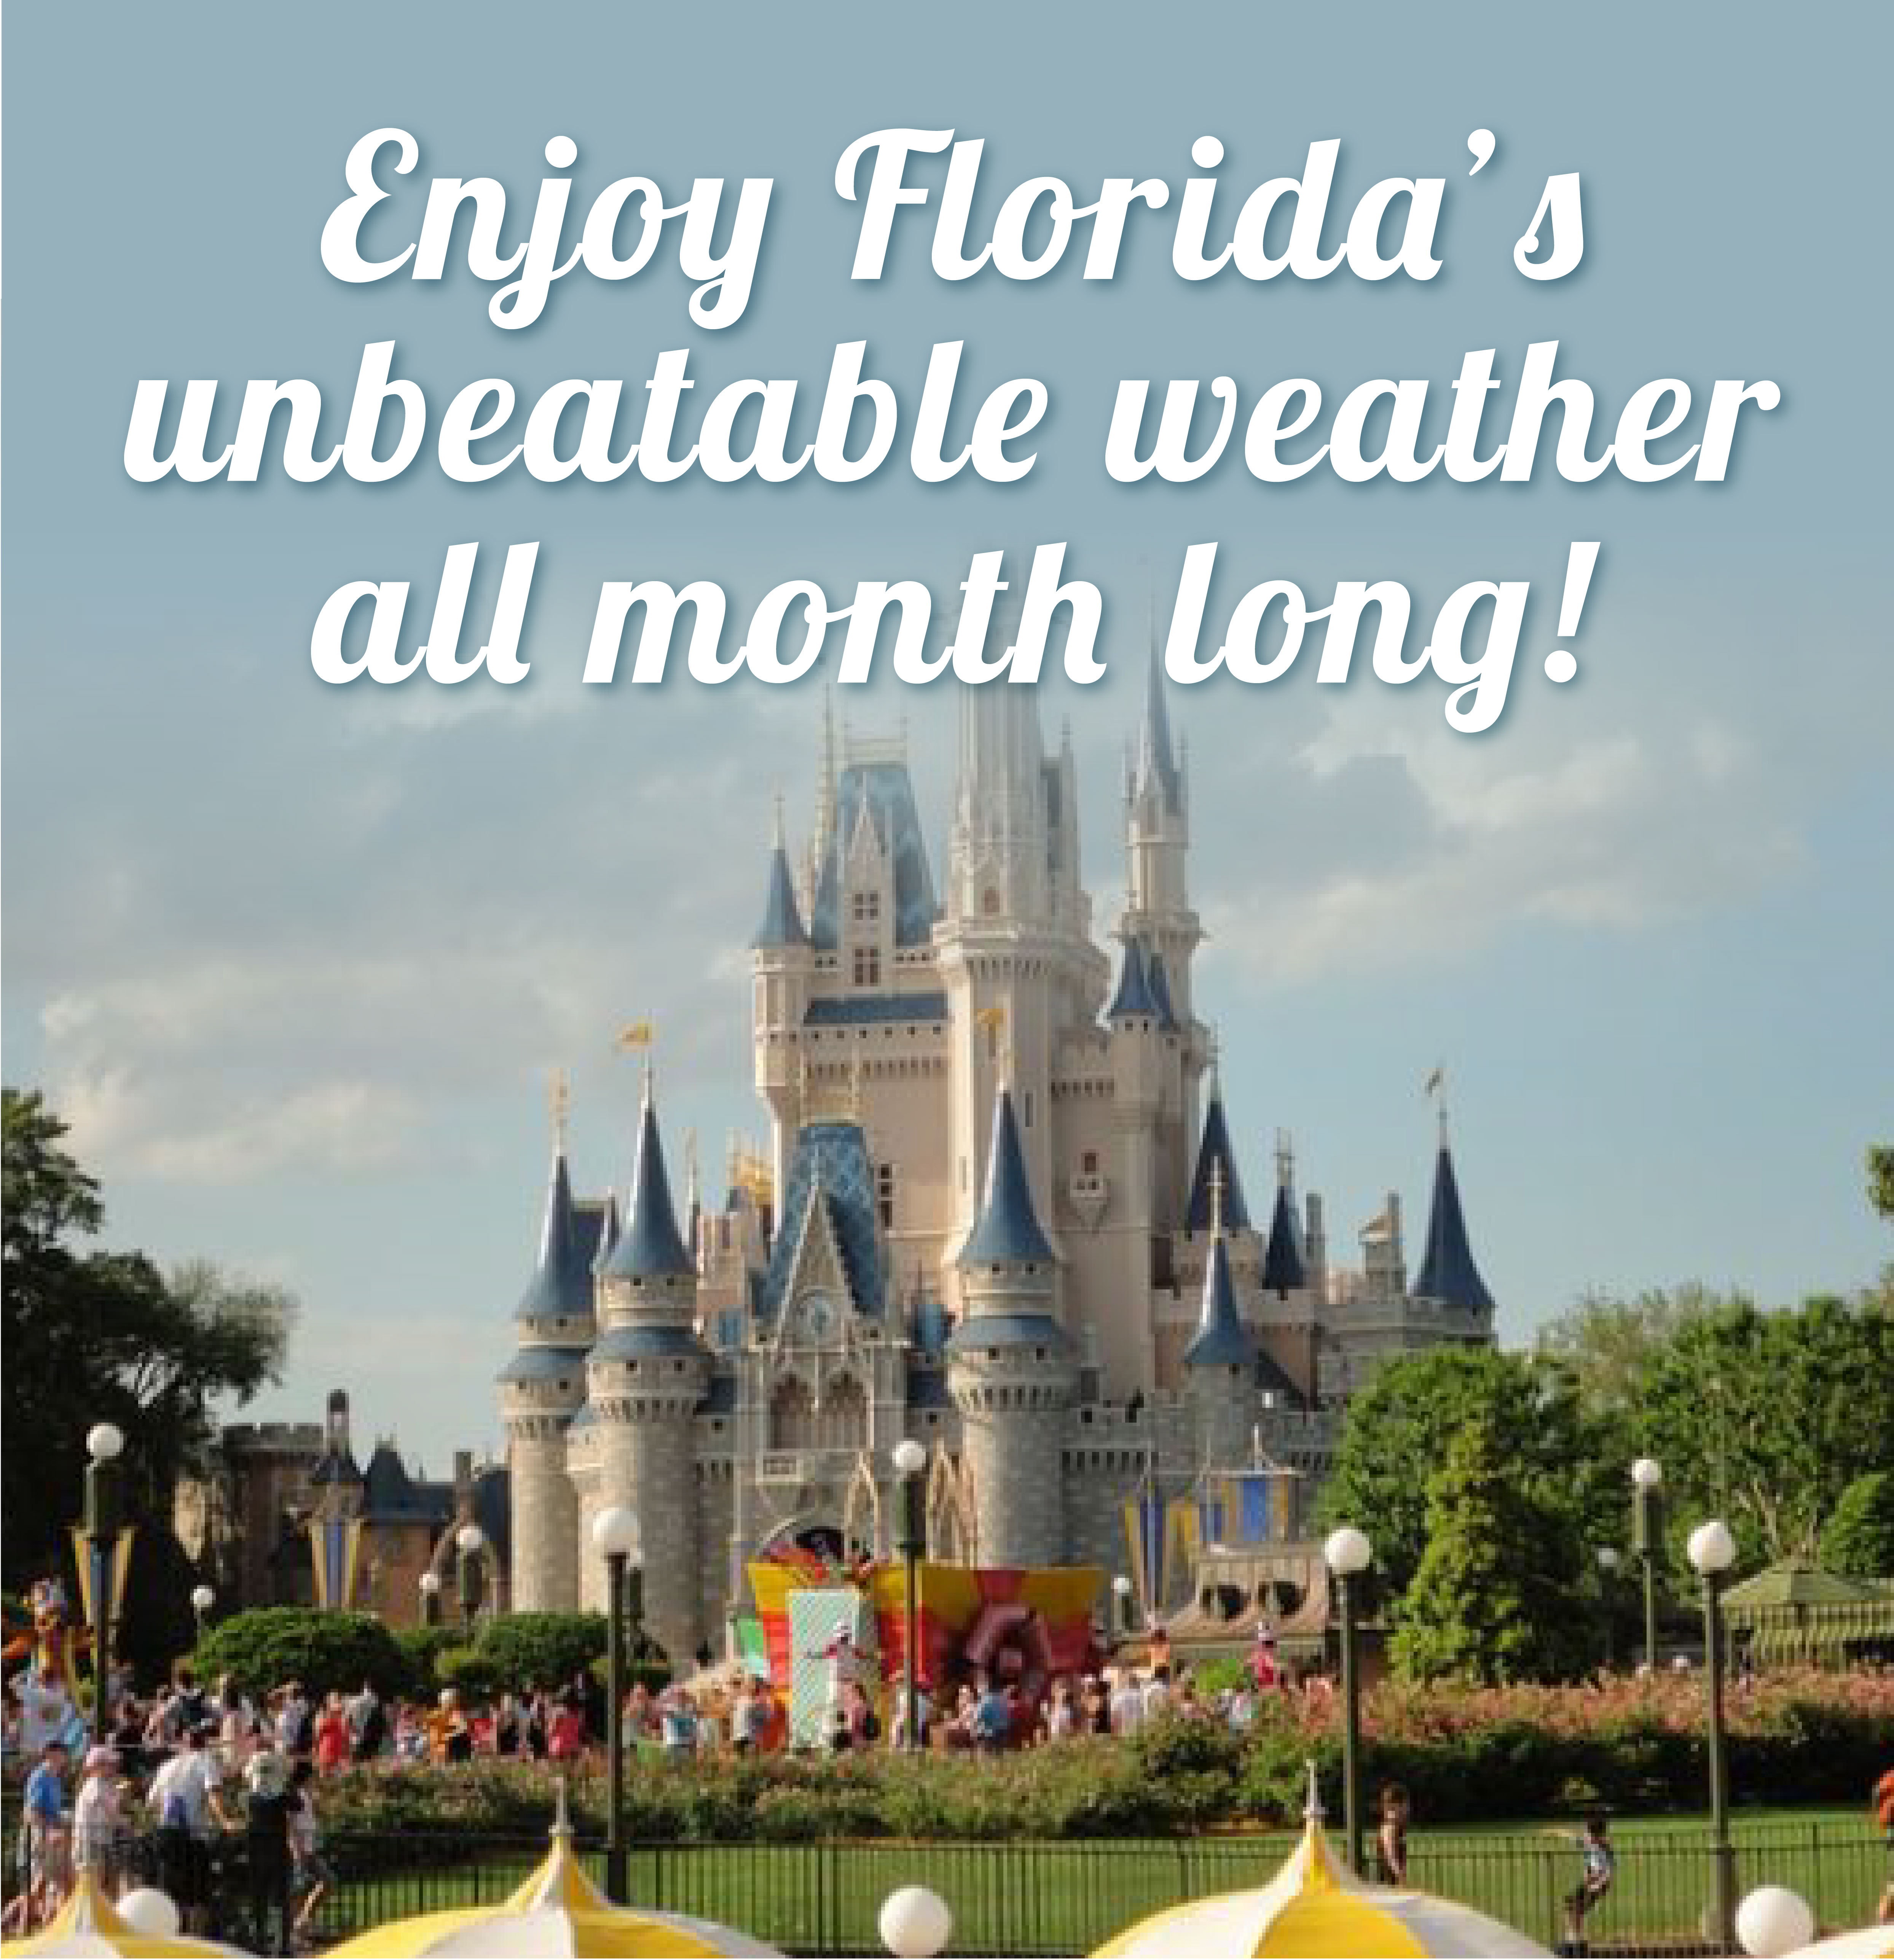 Enjoy Florida's unbeatable weather all month long